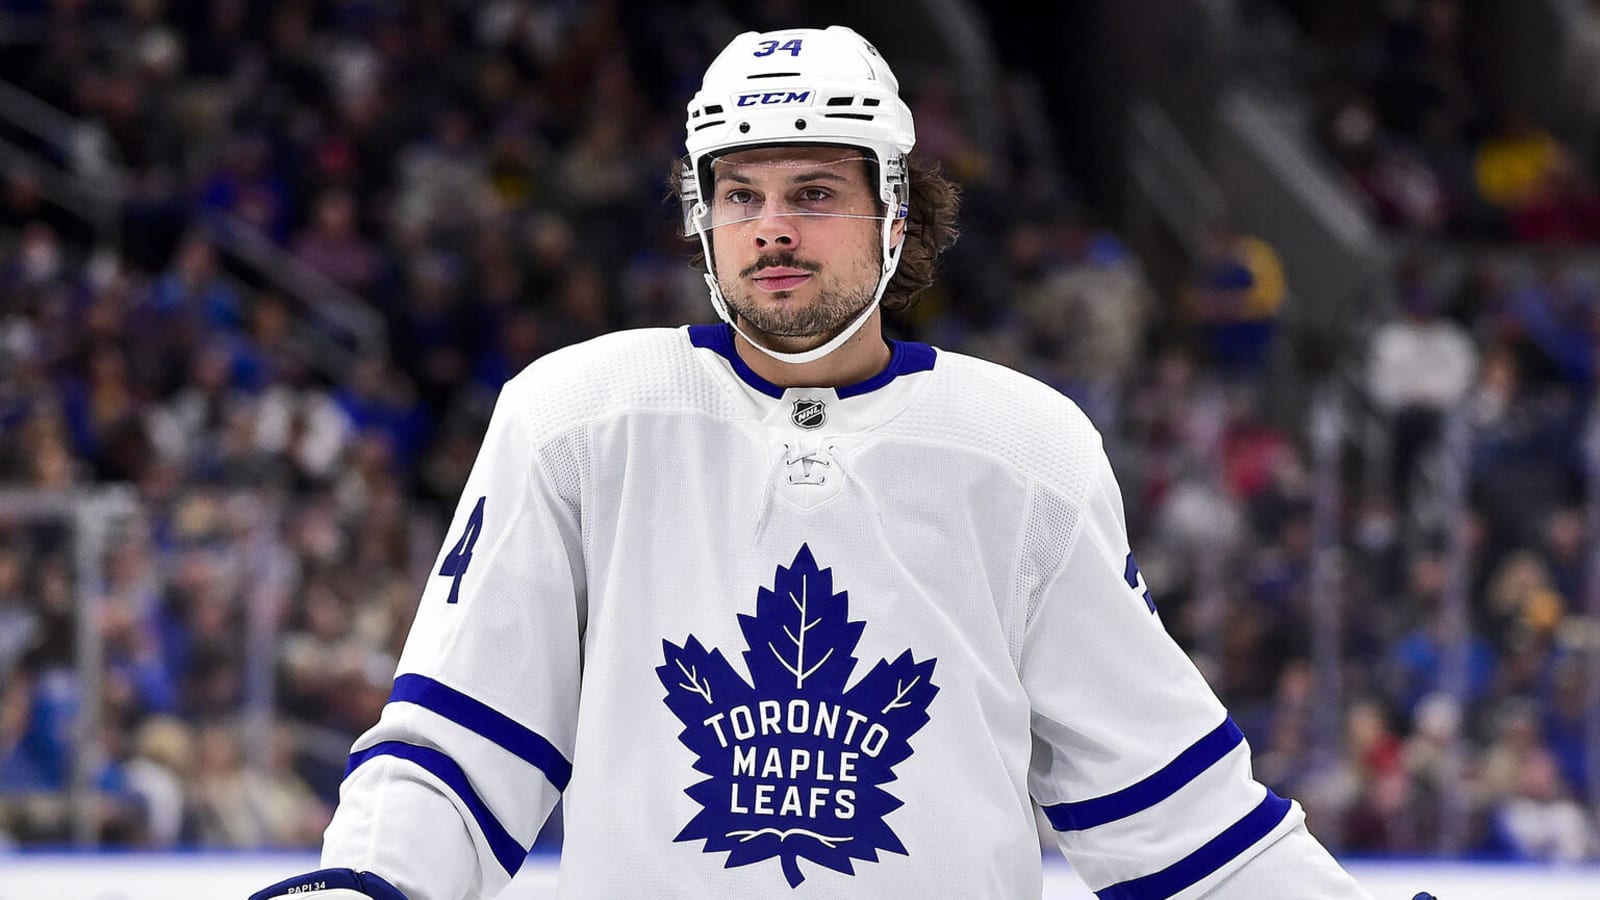 Auston Matthews expects to face Flames after injury scare